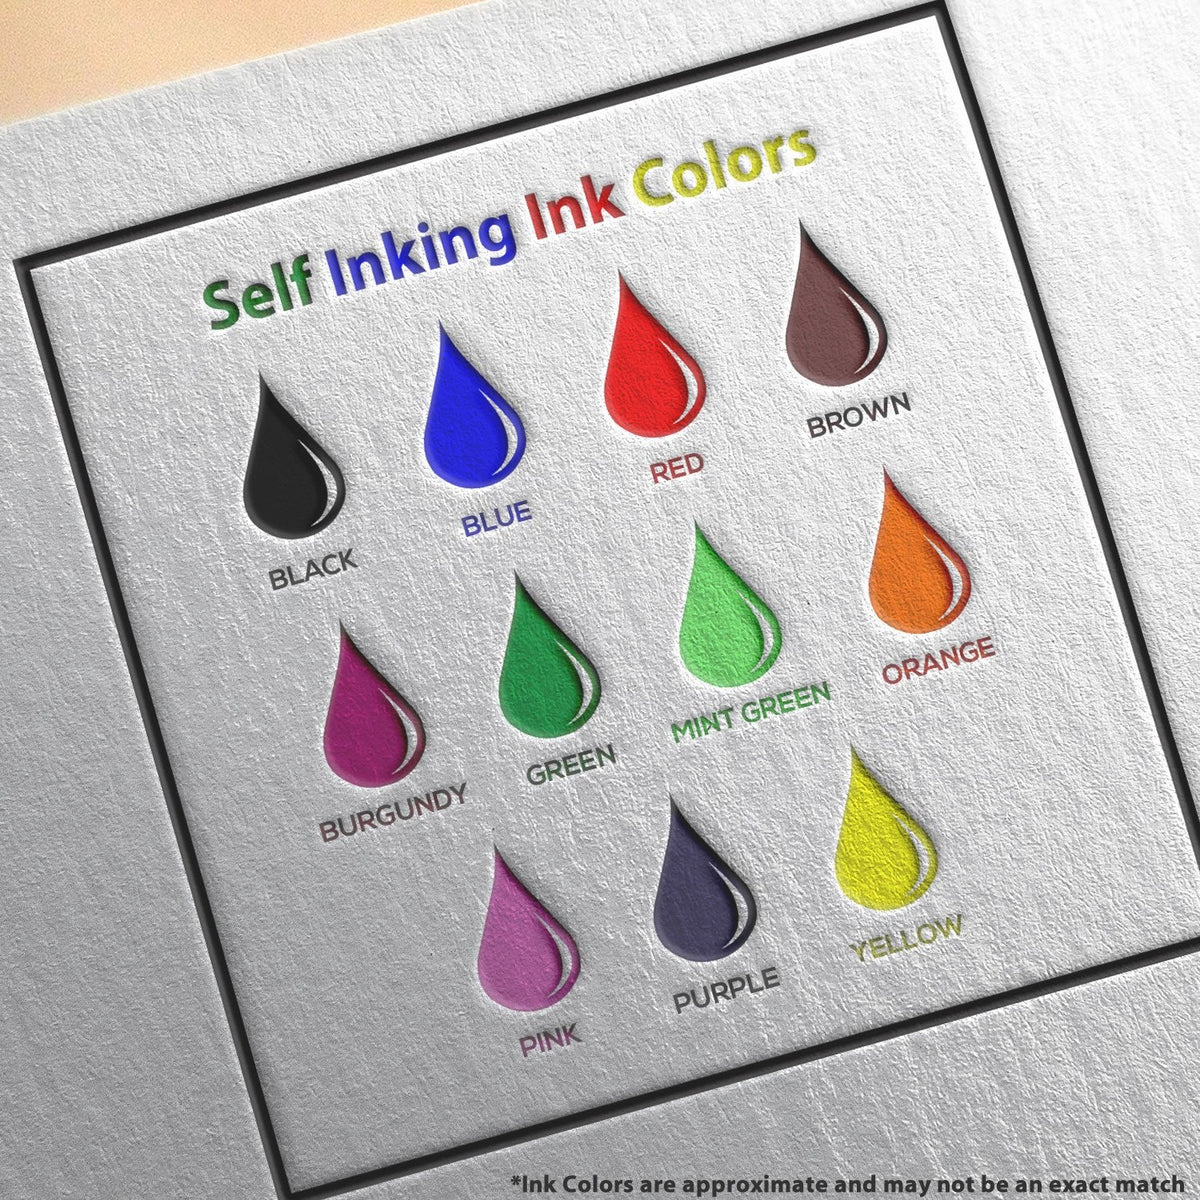 Self-Inking Read and Route with Lines Stamp Ink Color Options